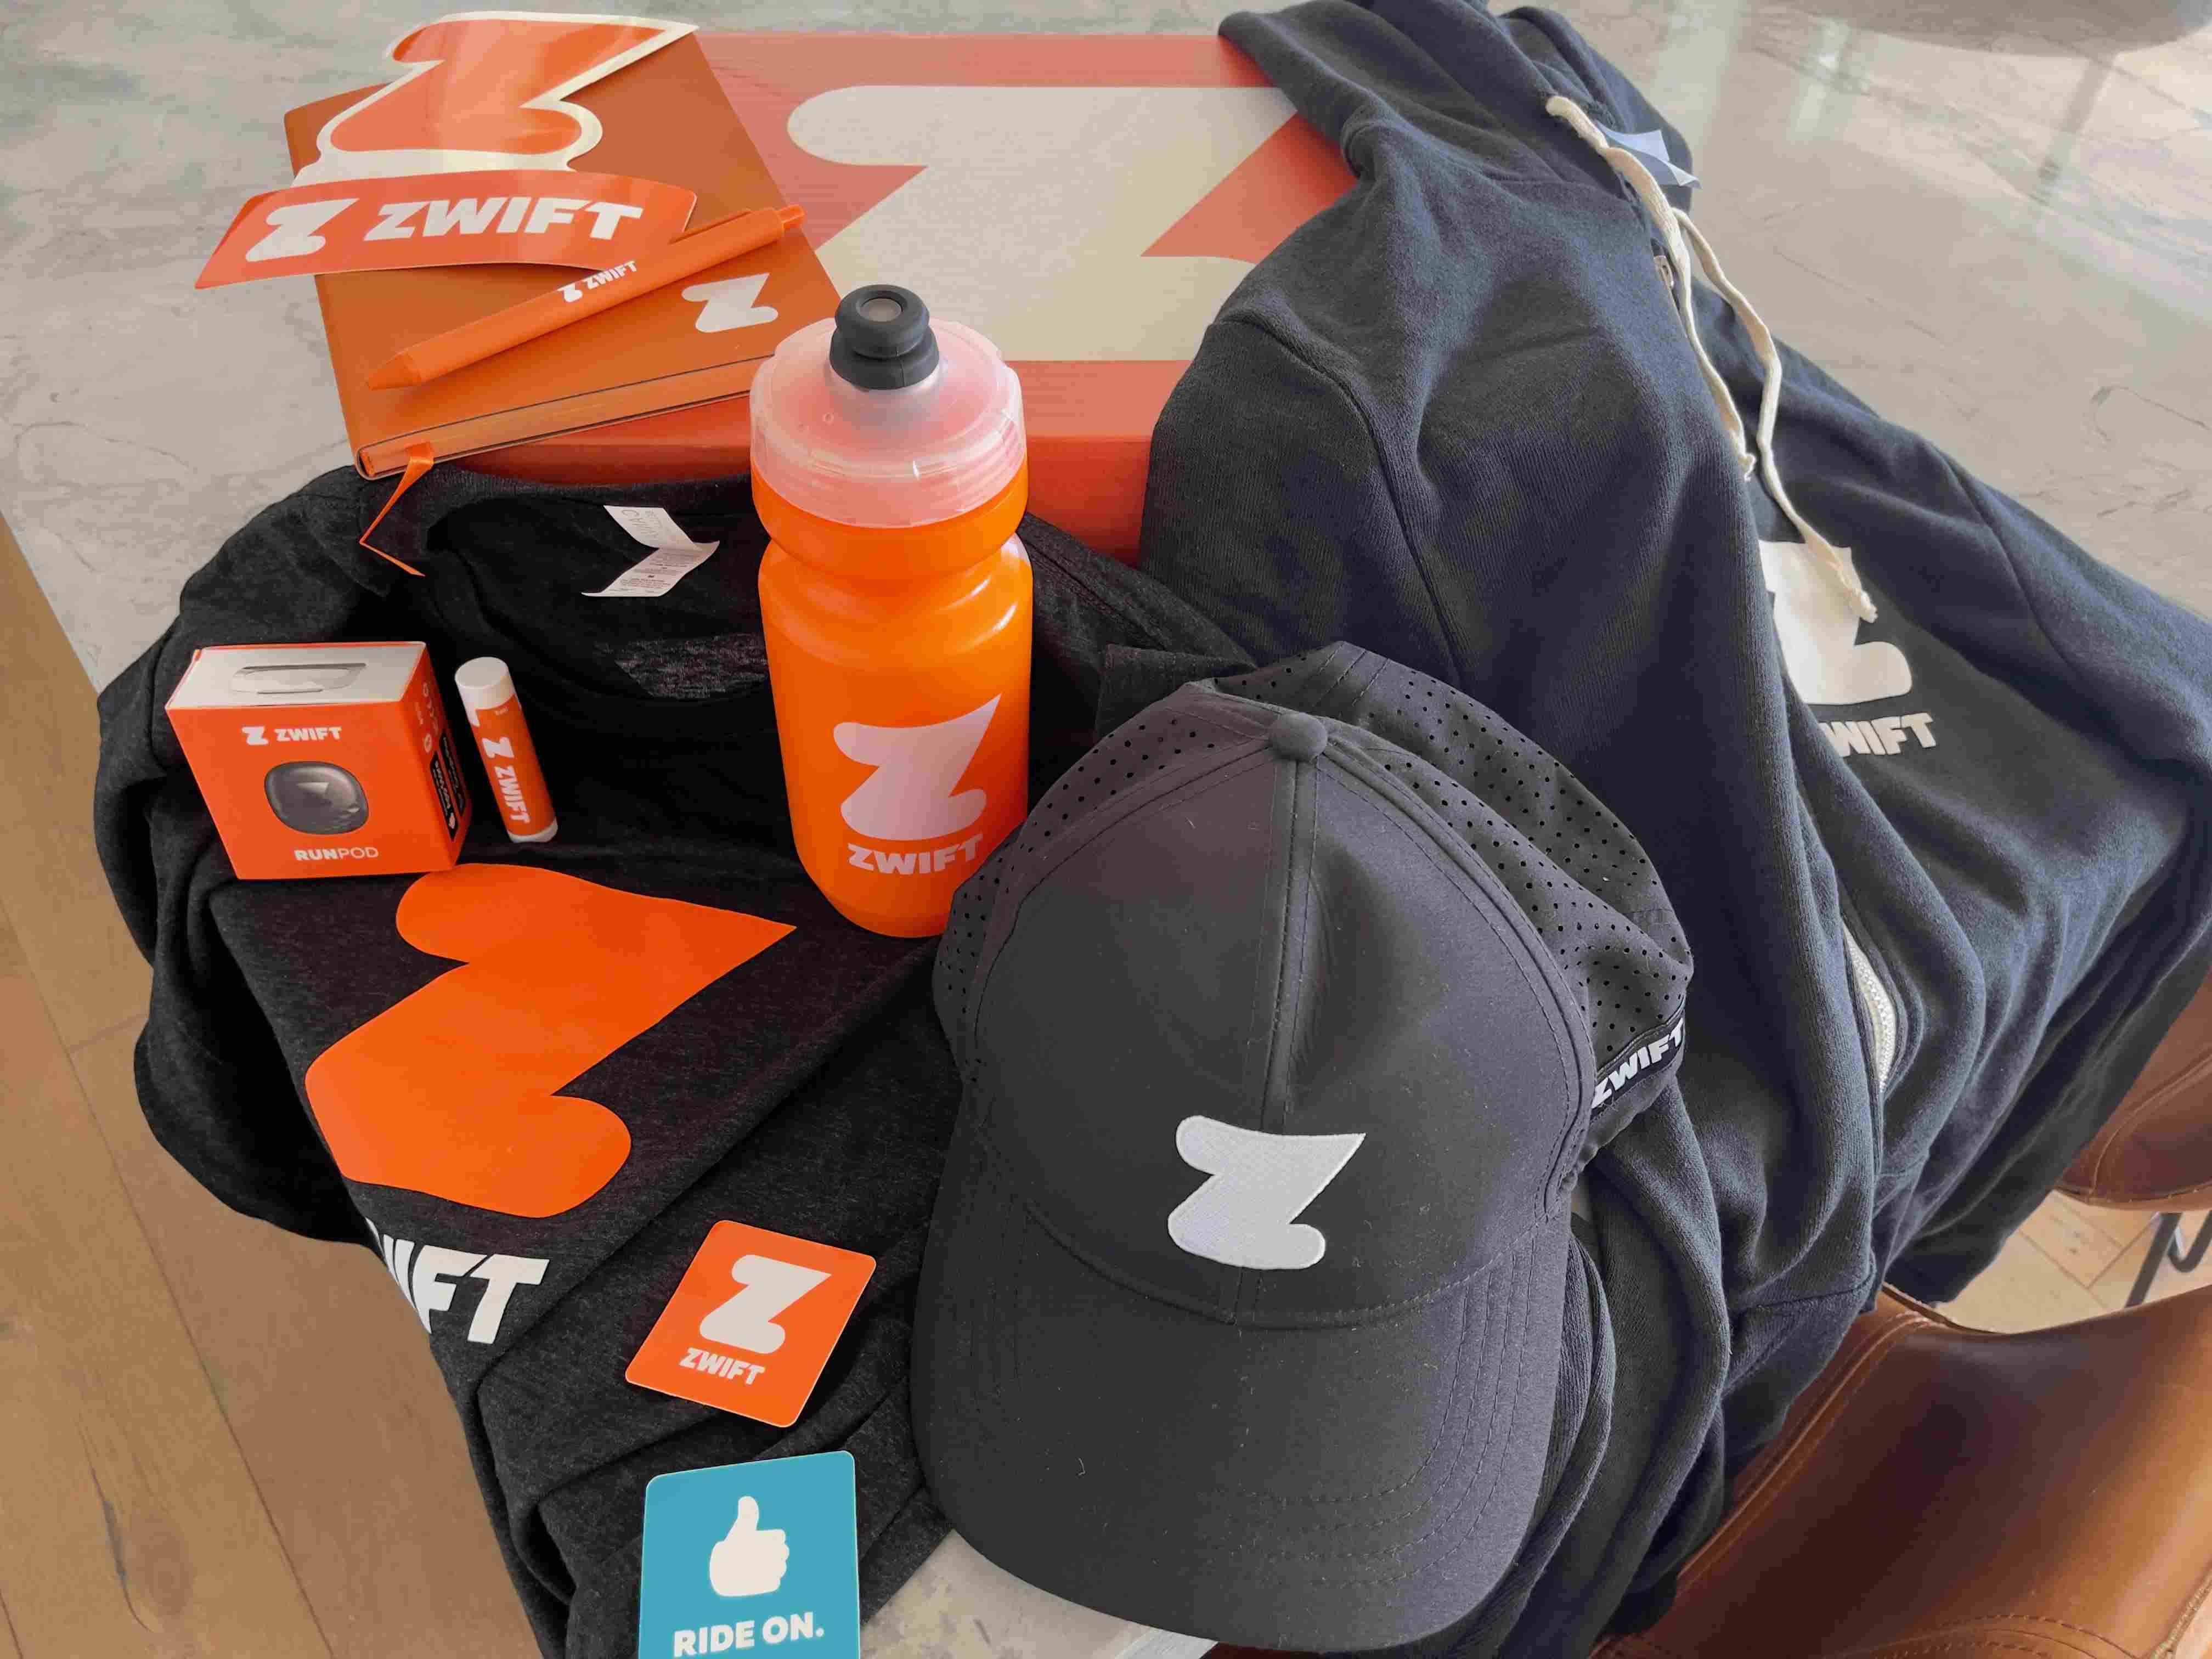 Welcome kit from Zwift!